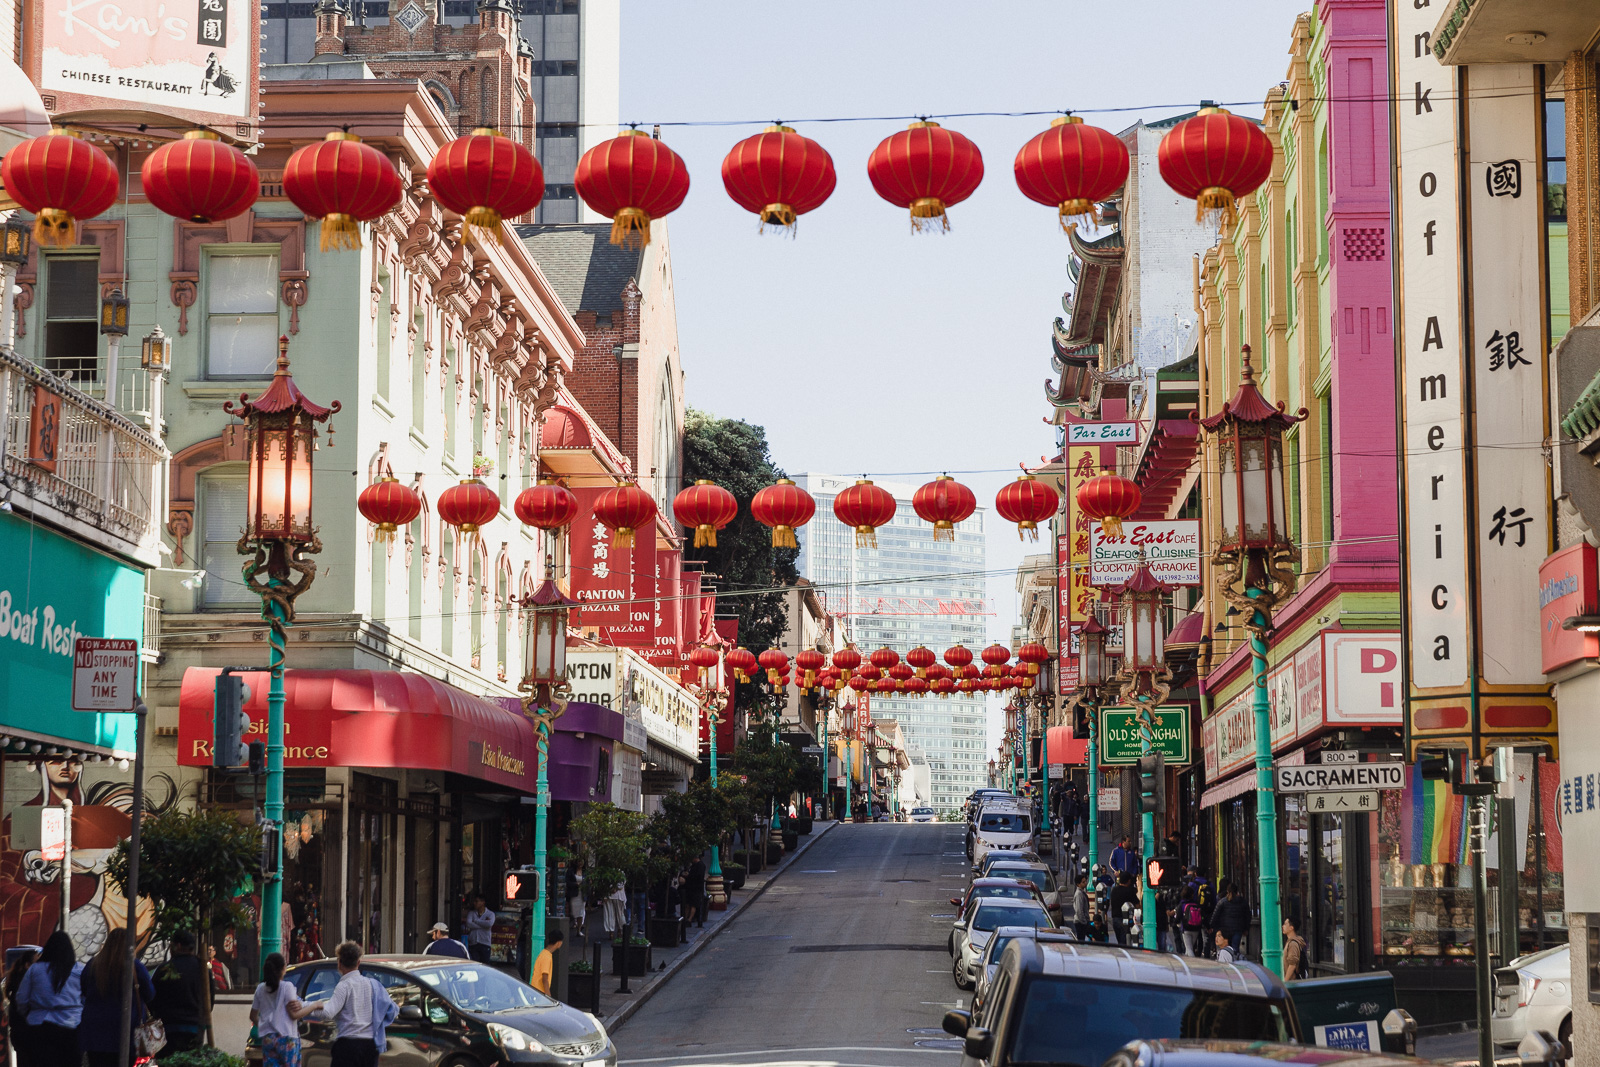 Colorful Chinatown street with paper lanterns in San Francisco's Chinatown